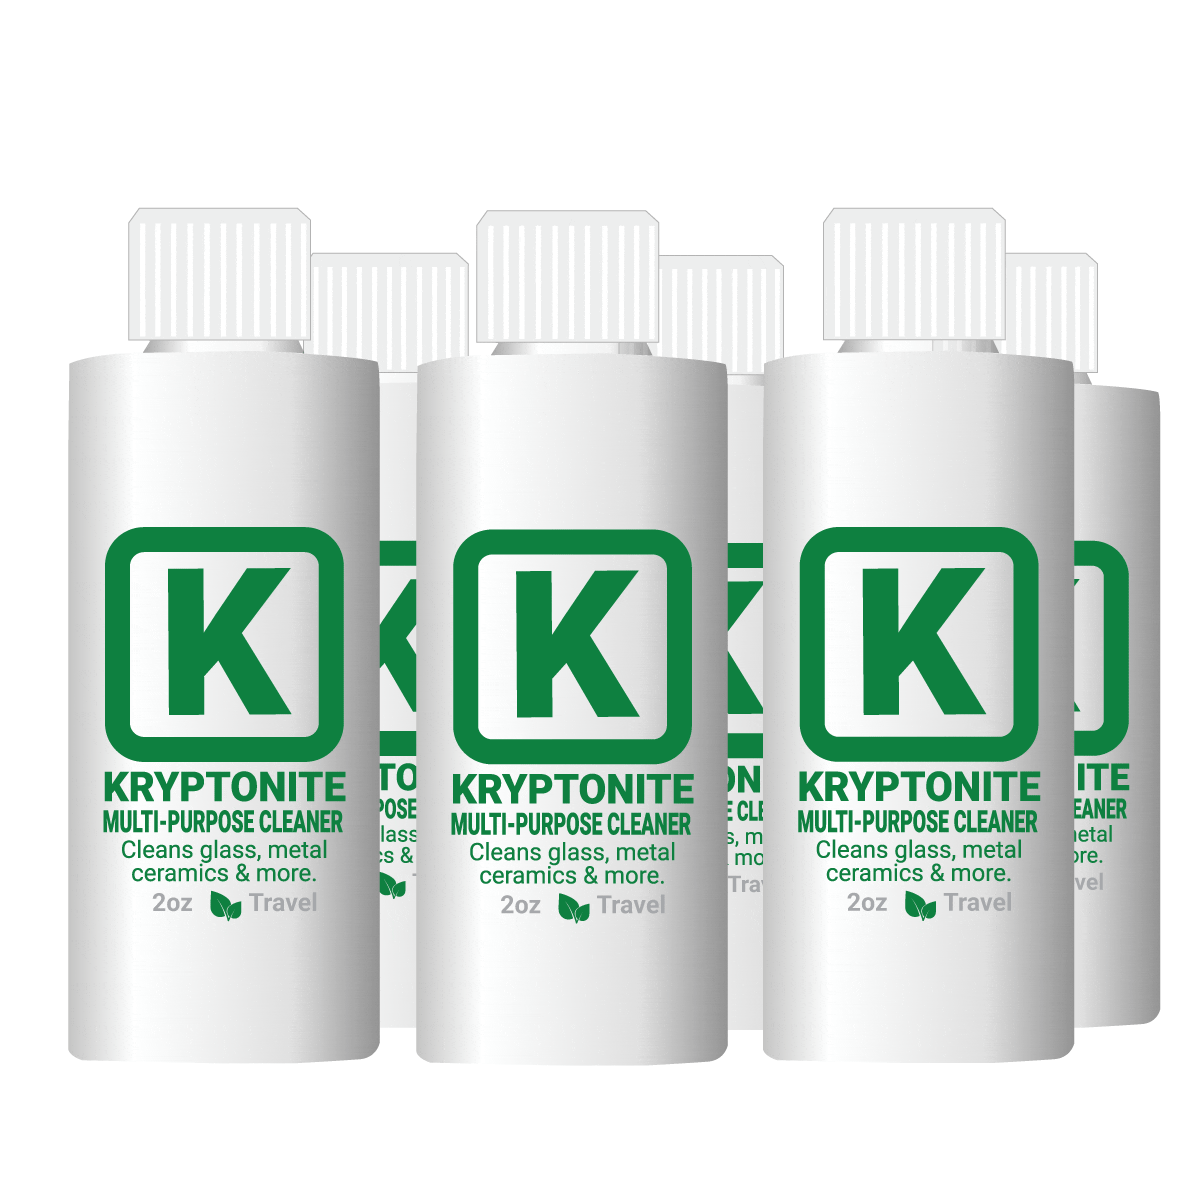 KLEAR Kryptonite Bong Cleaner Extended Vacation Pack 420  pipe cleaning solution. Best formula420 bong cleaning solution kryptonite coats the glass for best results.  710 cleaning solution